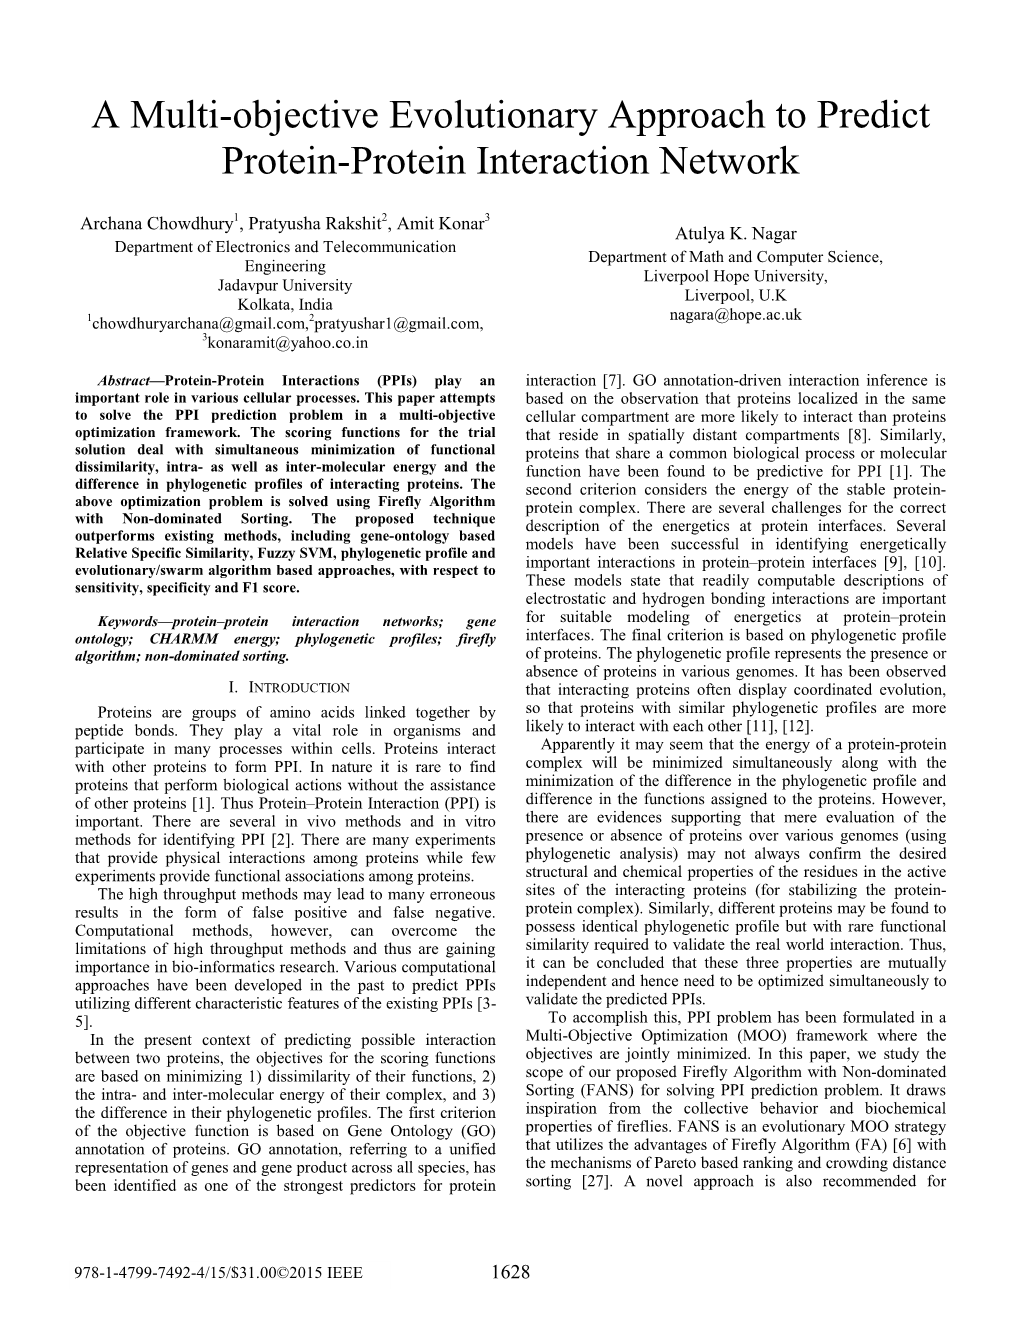 A Multi-Objective Evolutionary Approach to Predict Protein-Protein Interaction Network